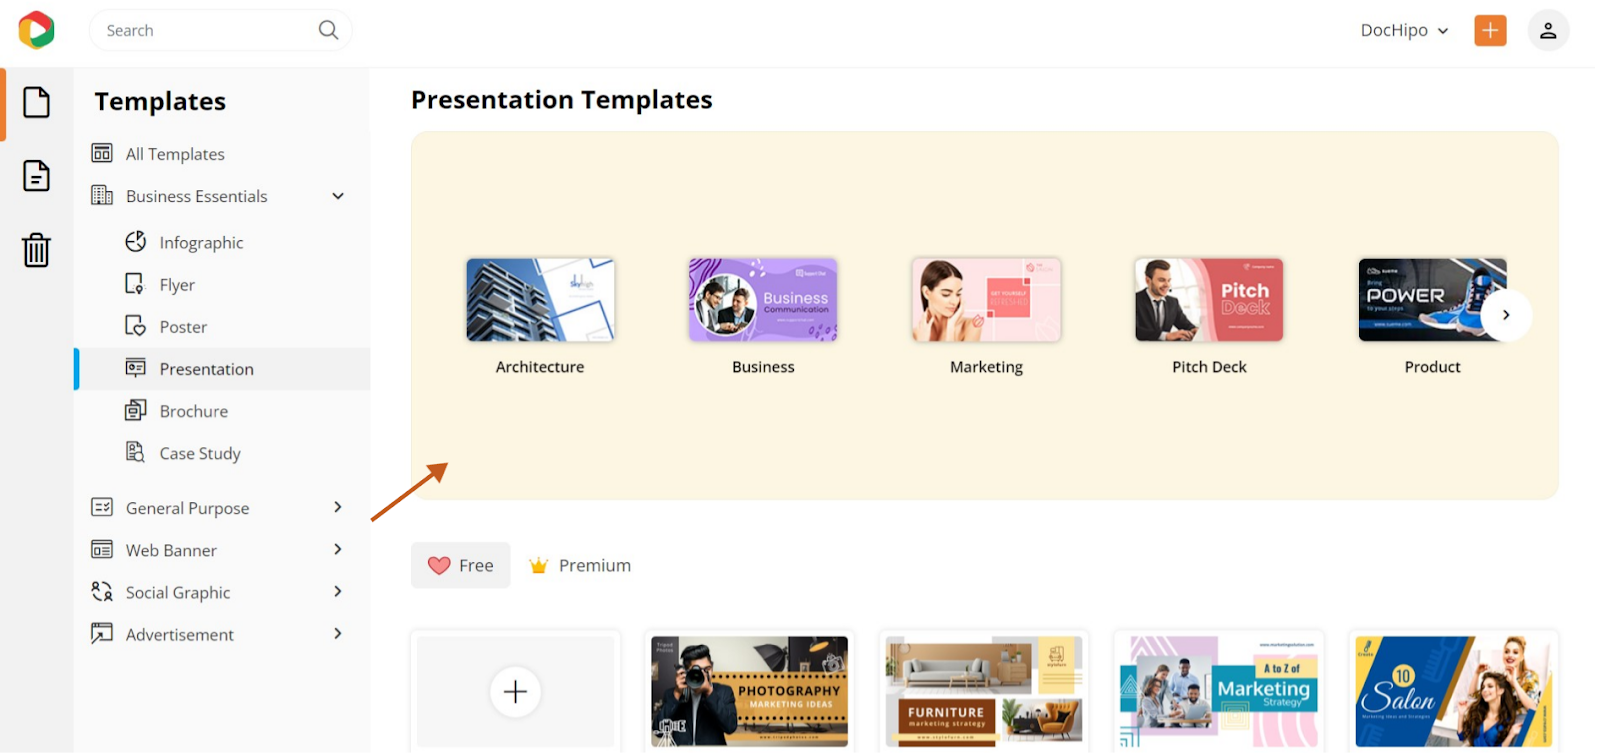 Search templates on DocHipo Presentation Software